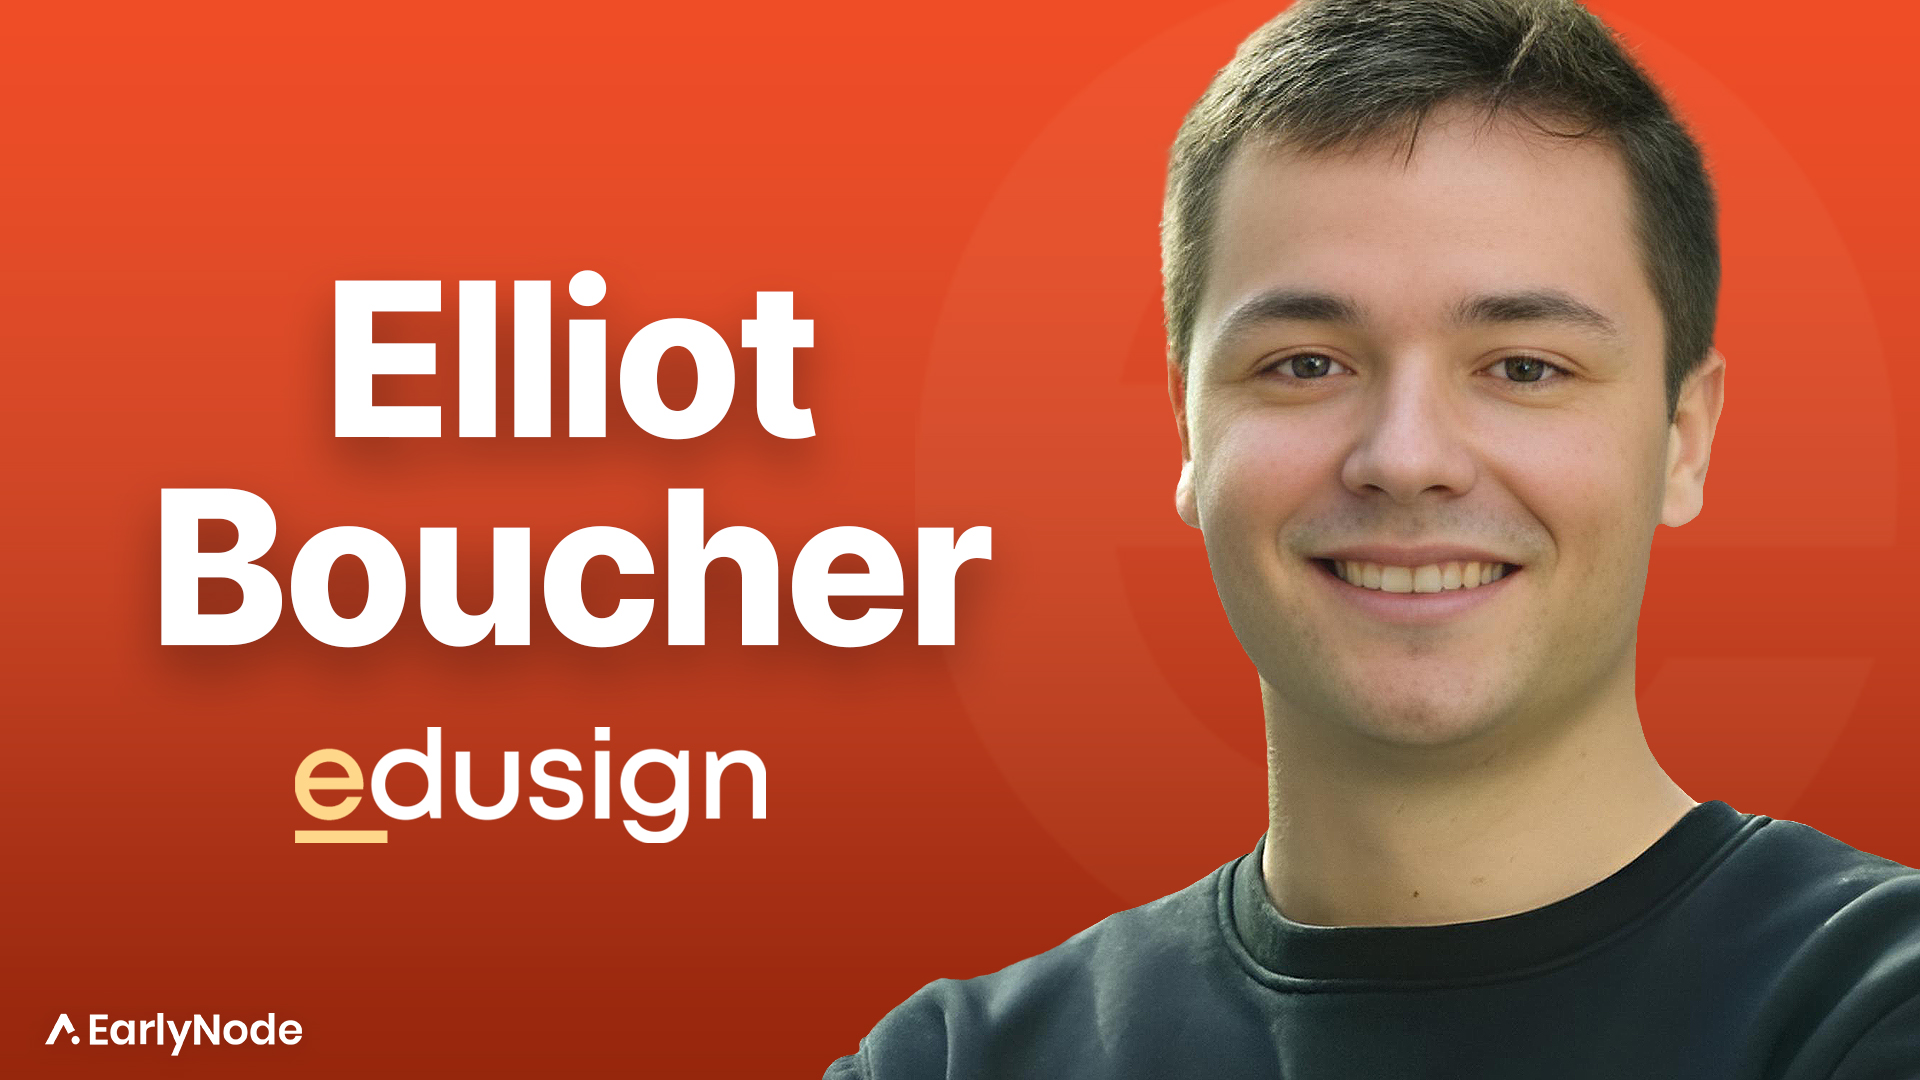 $0 to $2M ARR: How Elliot Boucher is Pioneering Paperless Education with Edusign